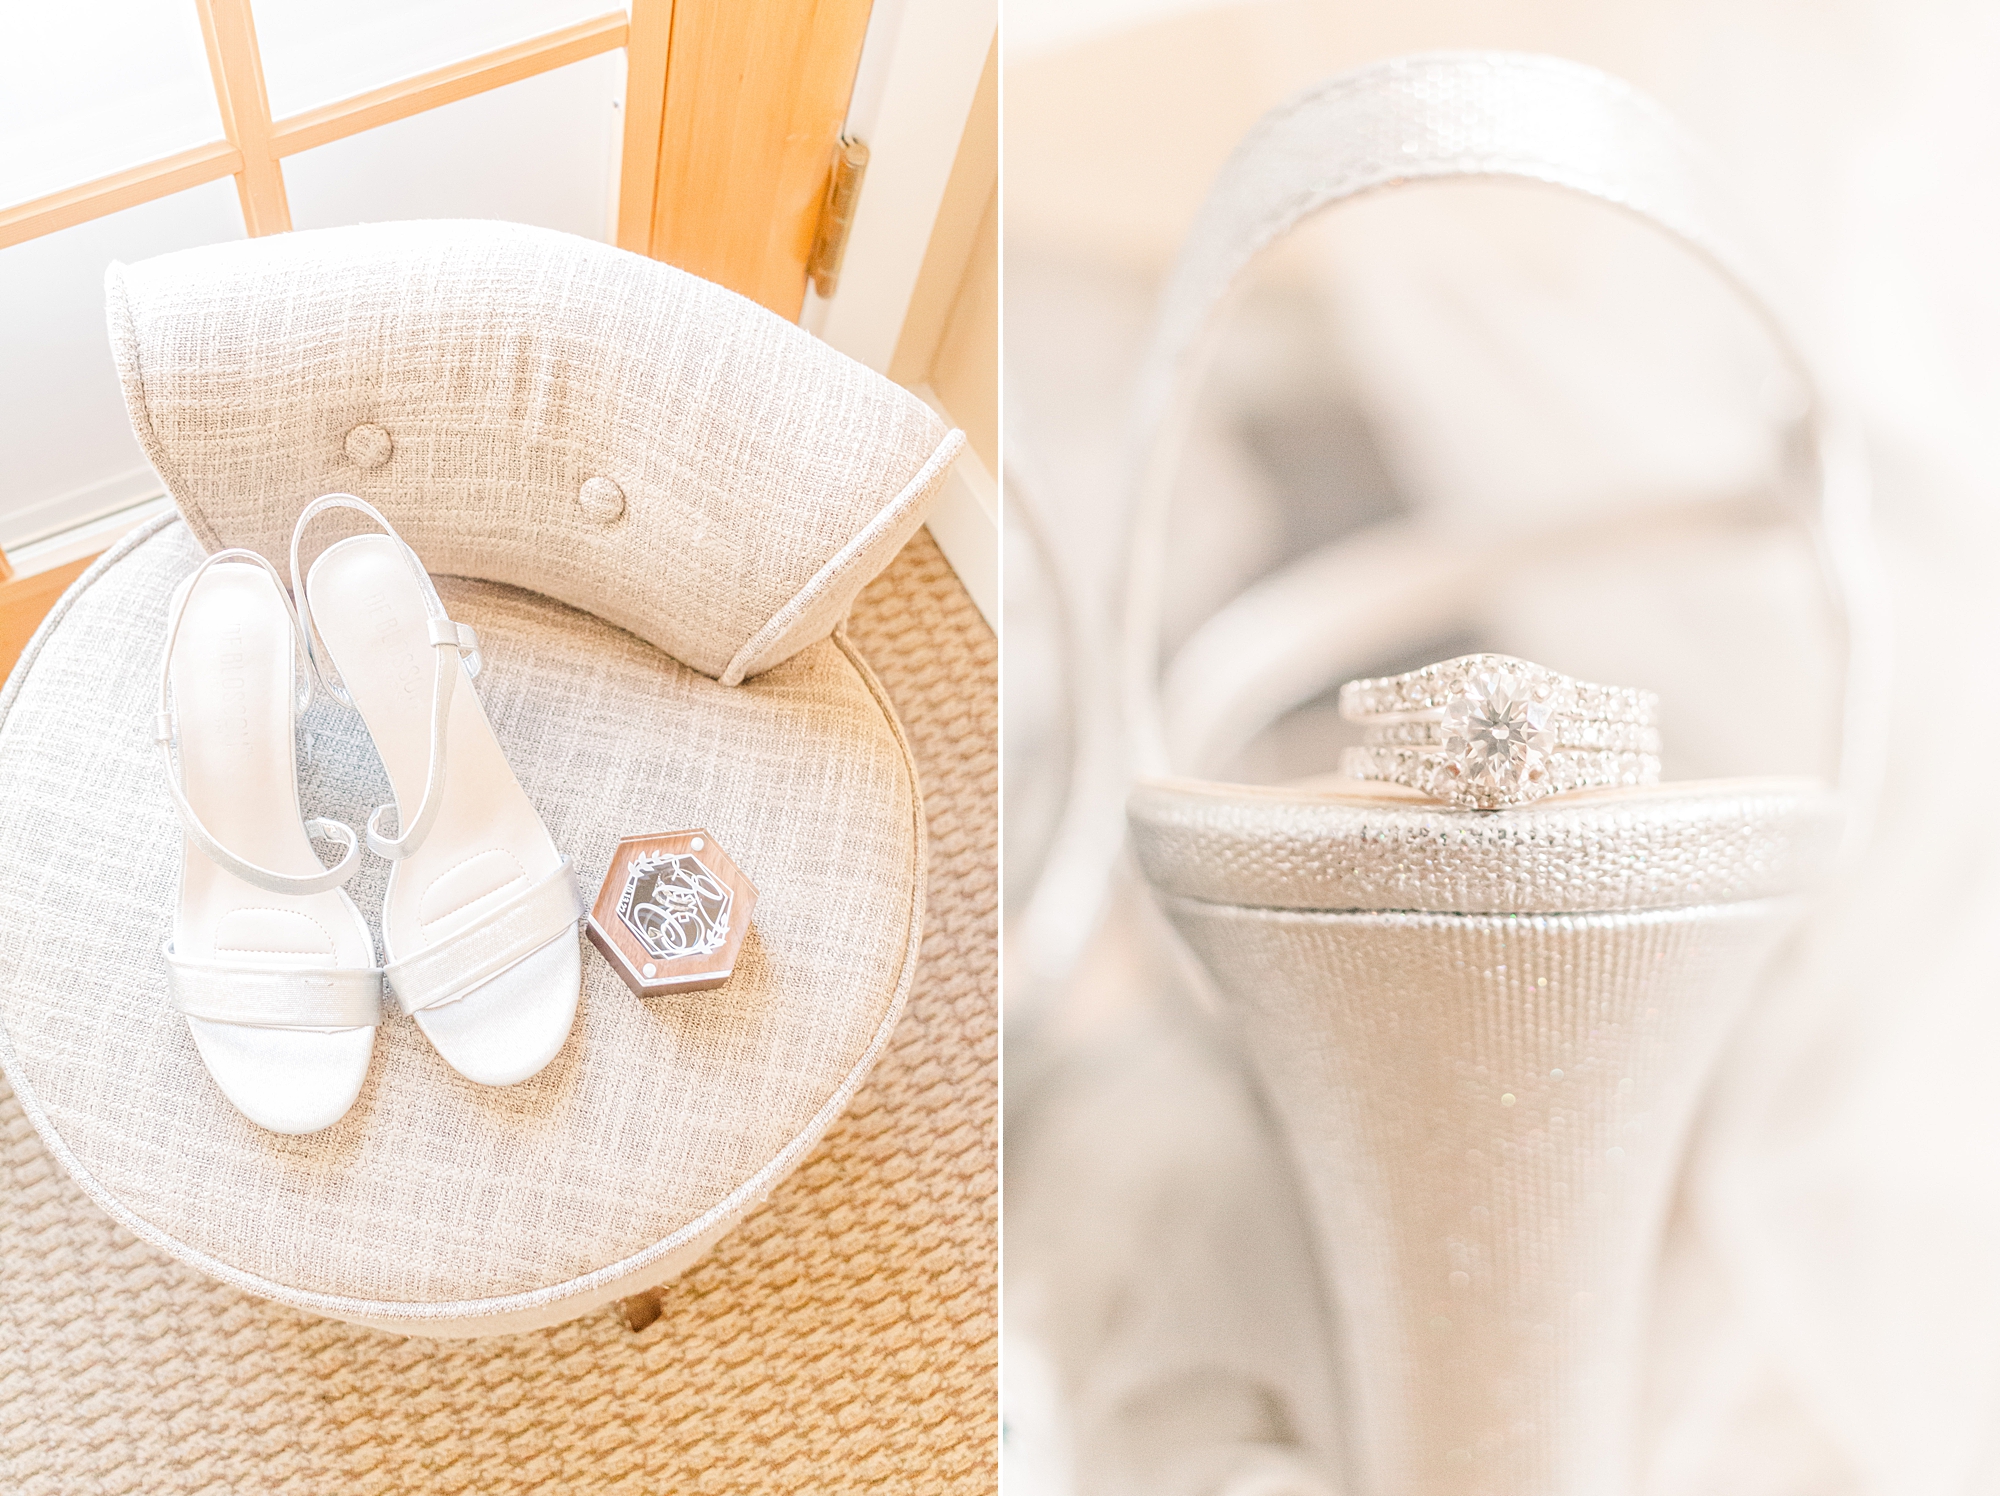 bride's shoes and wedding rings